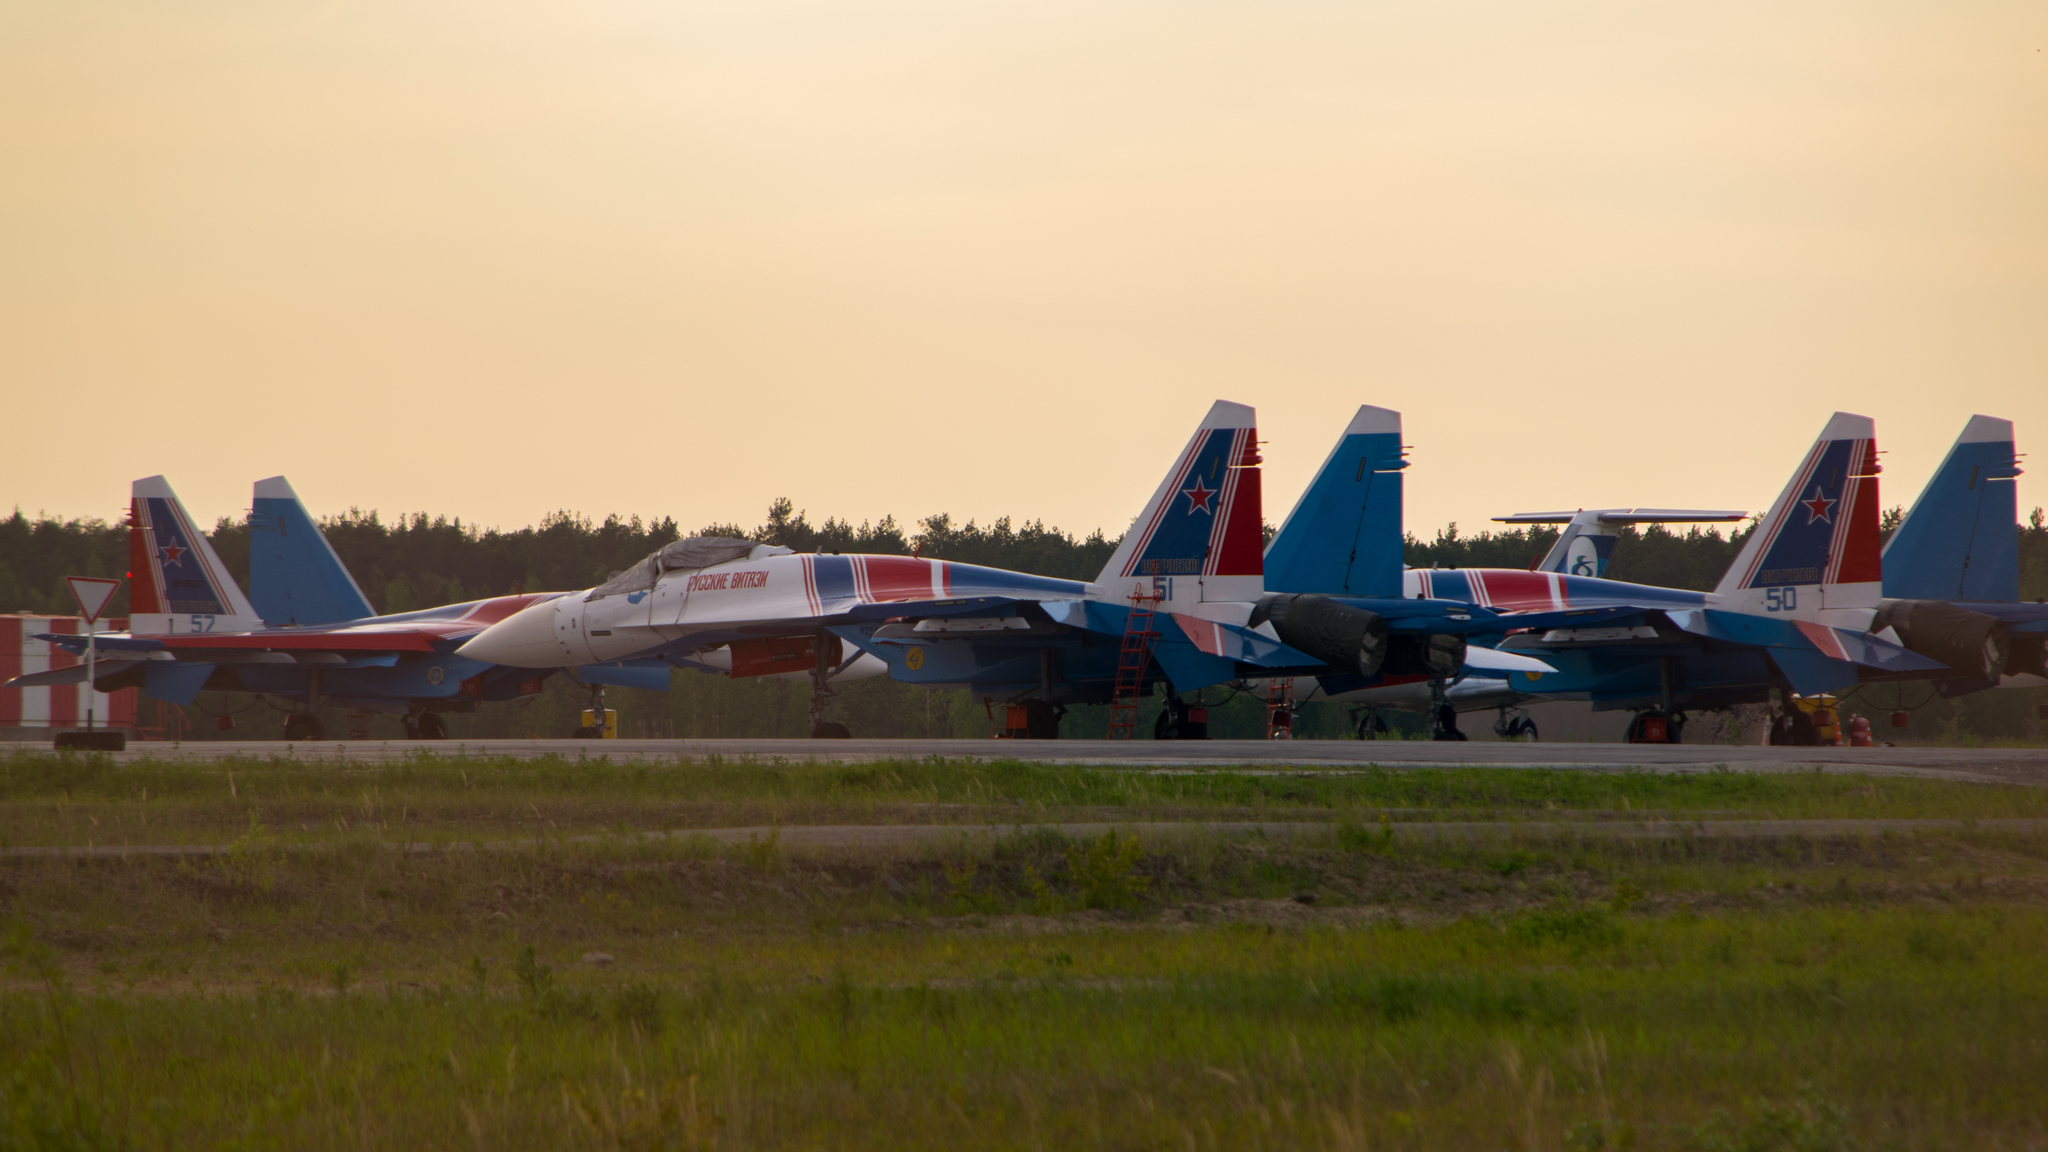 Russian knights and a little different aviation - Longpost, The airport, KhMAO, The photo, Surgut, Aviation, Russian Knights, My